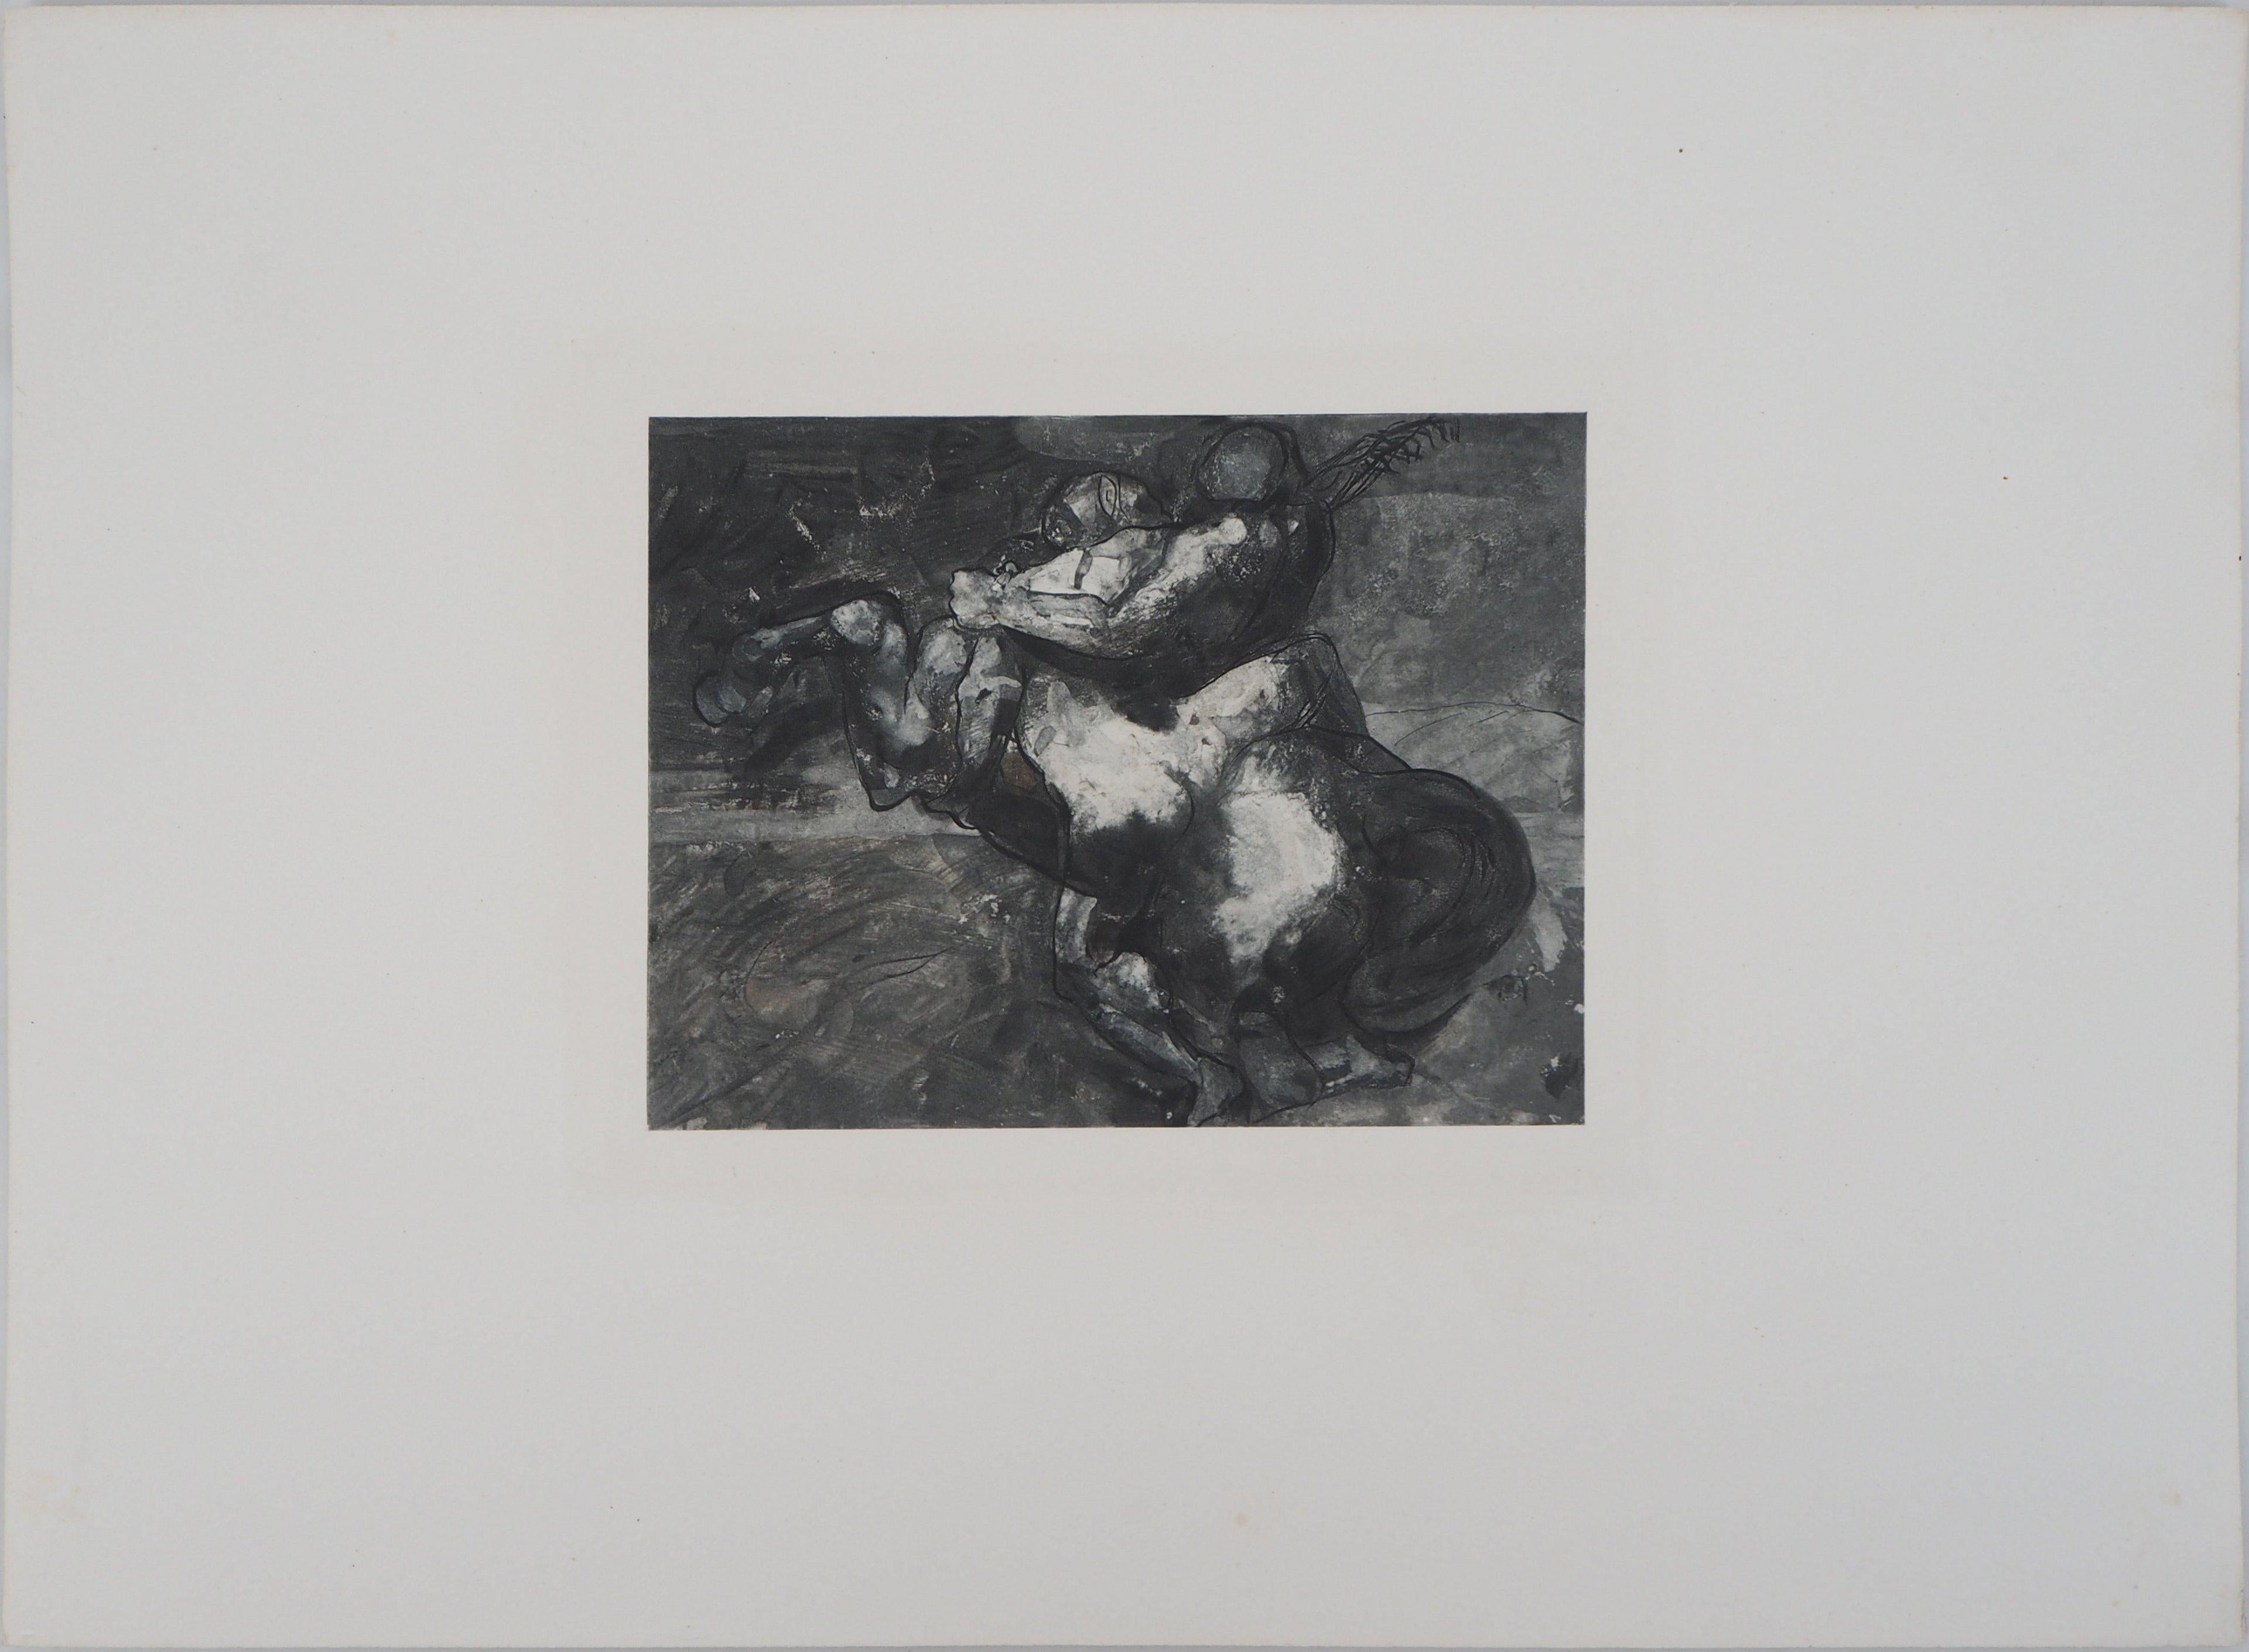 The Strength - Etching, 1897 (Goupil, Limited to 125 copies) - Print by (after) Auguste Rodin